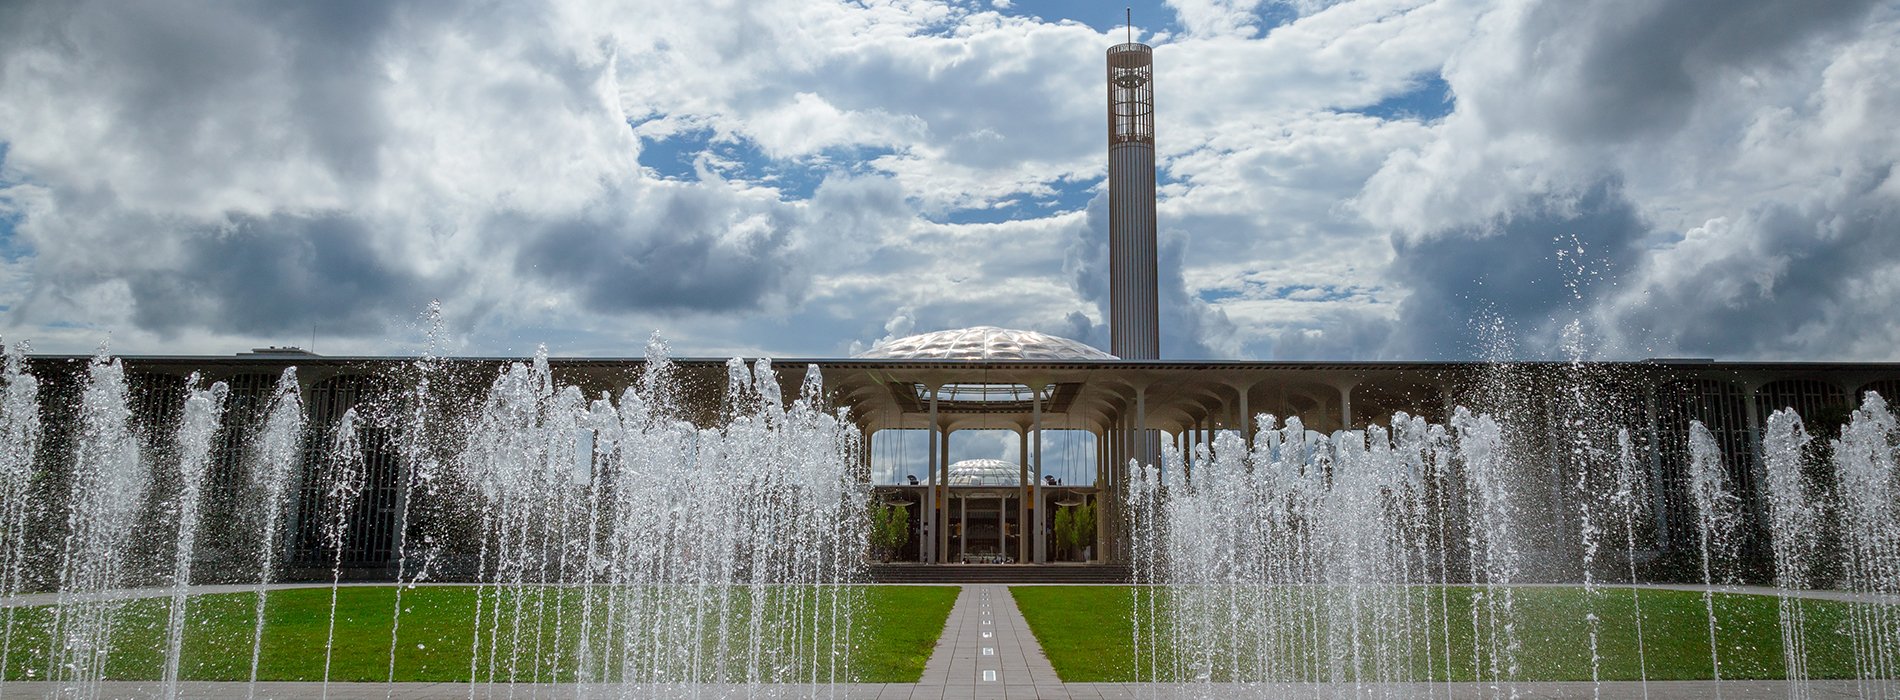 Fountains flow on campus in front of the UAlbany Academic Podium on a cloudy day.